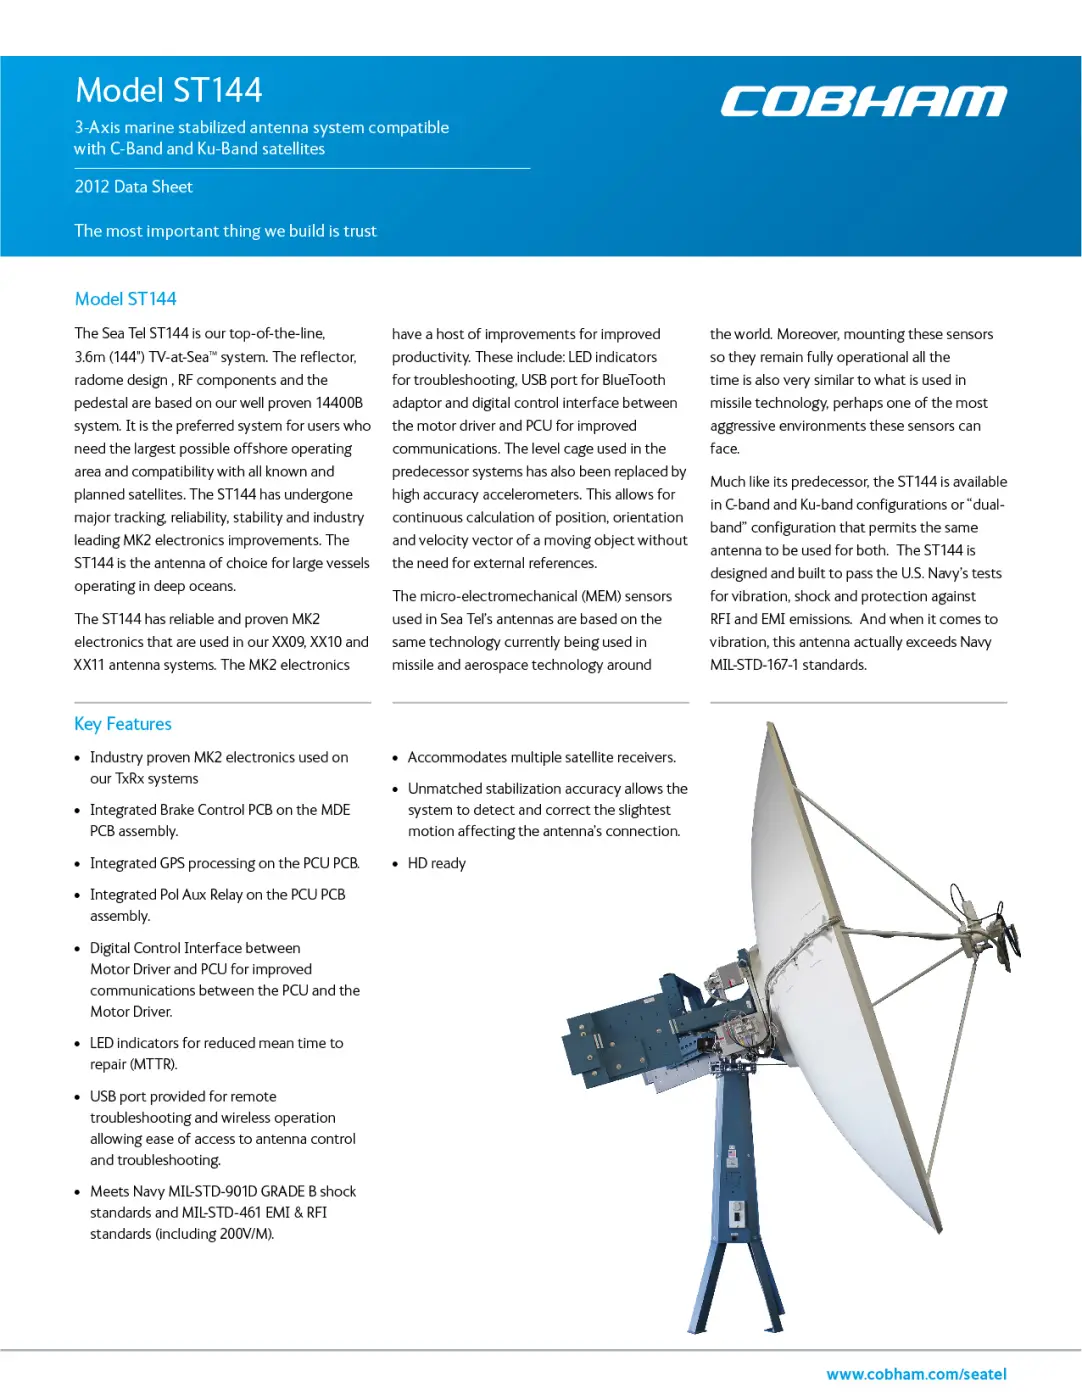 Data sheet for Cobham ST144, 3-Axis marine stabilized antenna system compatible with C-Band and Ku-Band satellites